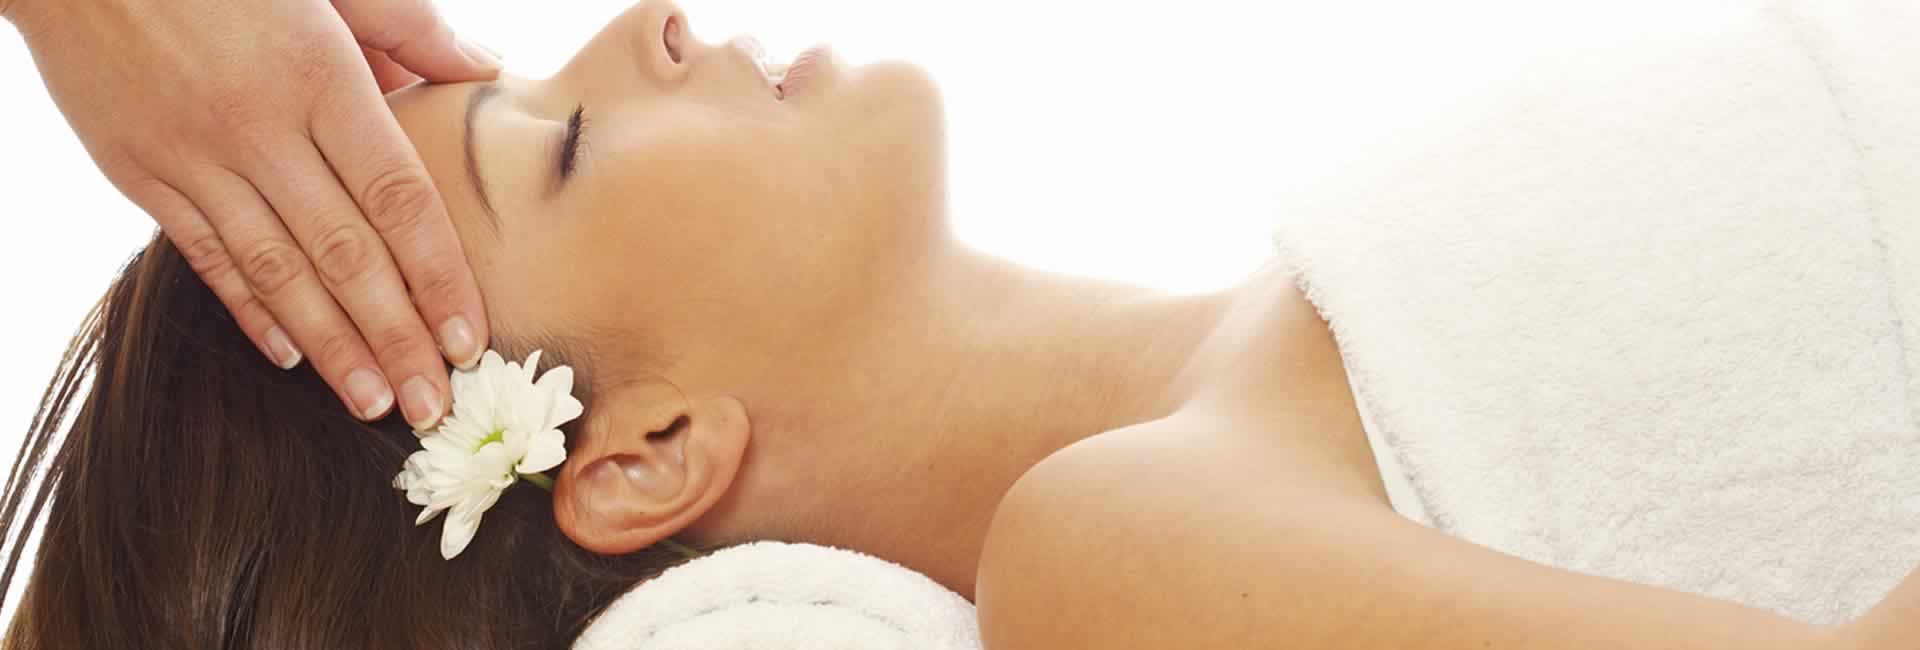 The added therapeutic benefits of essential oils during massage